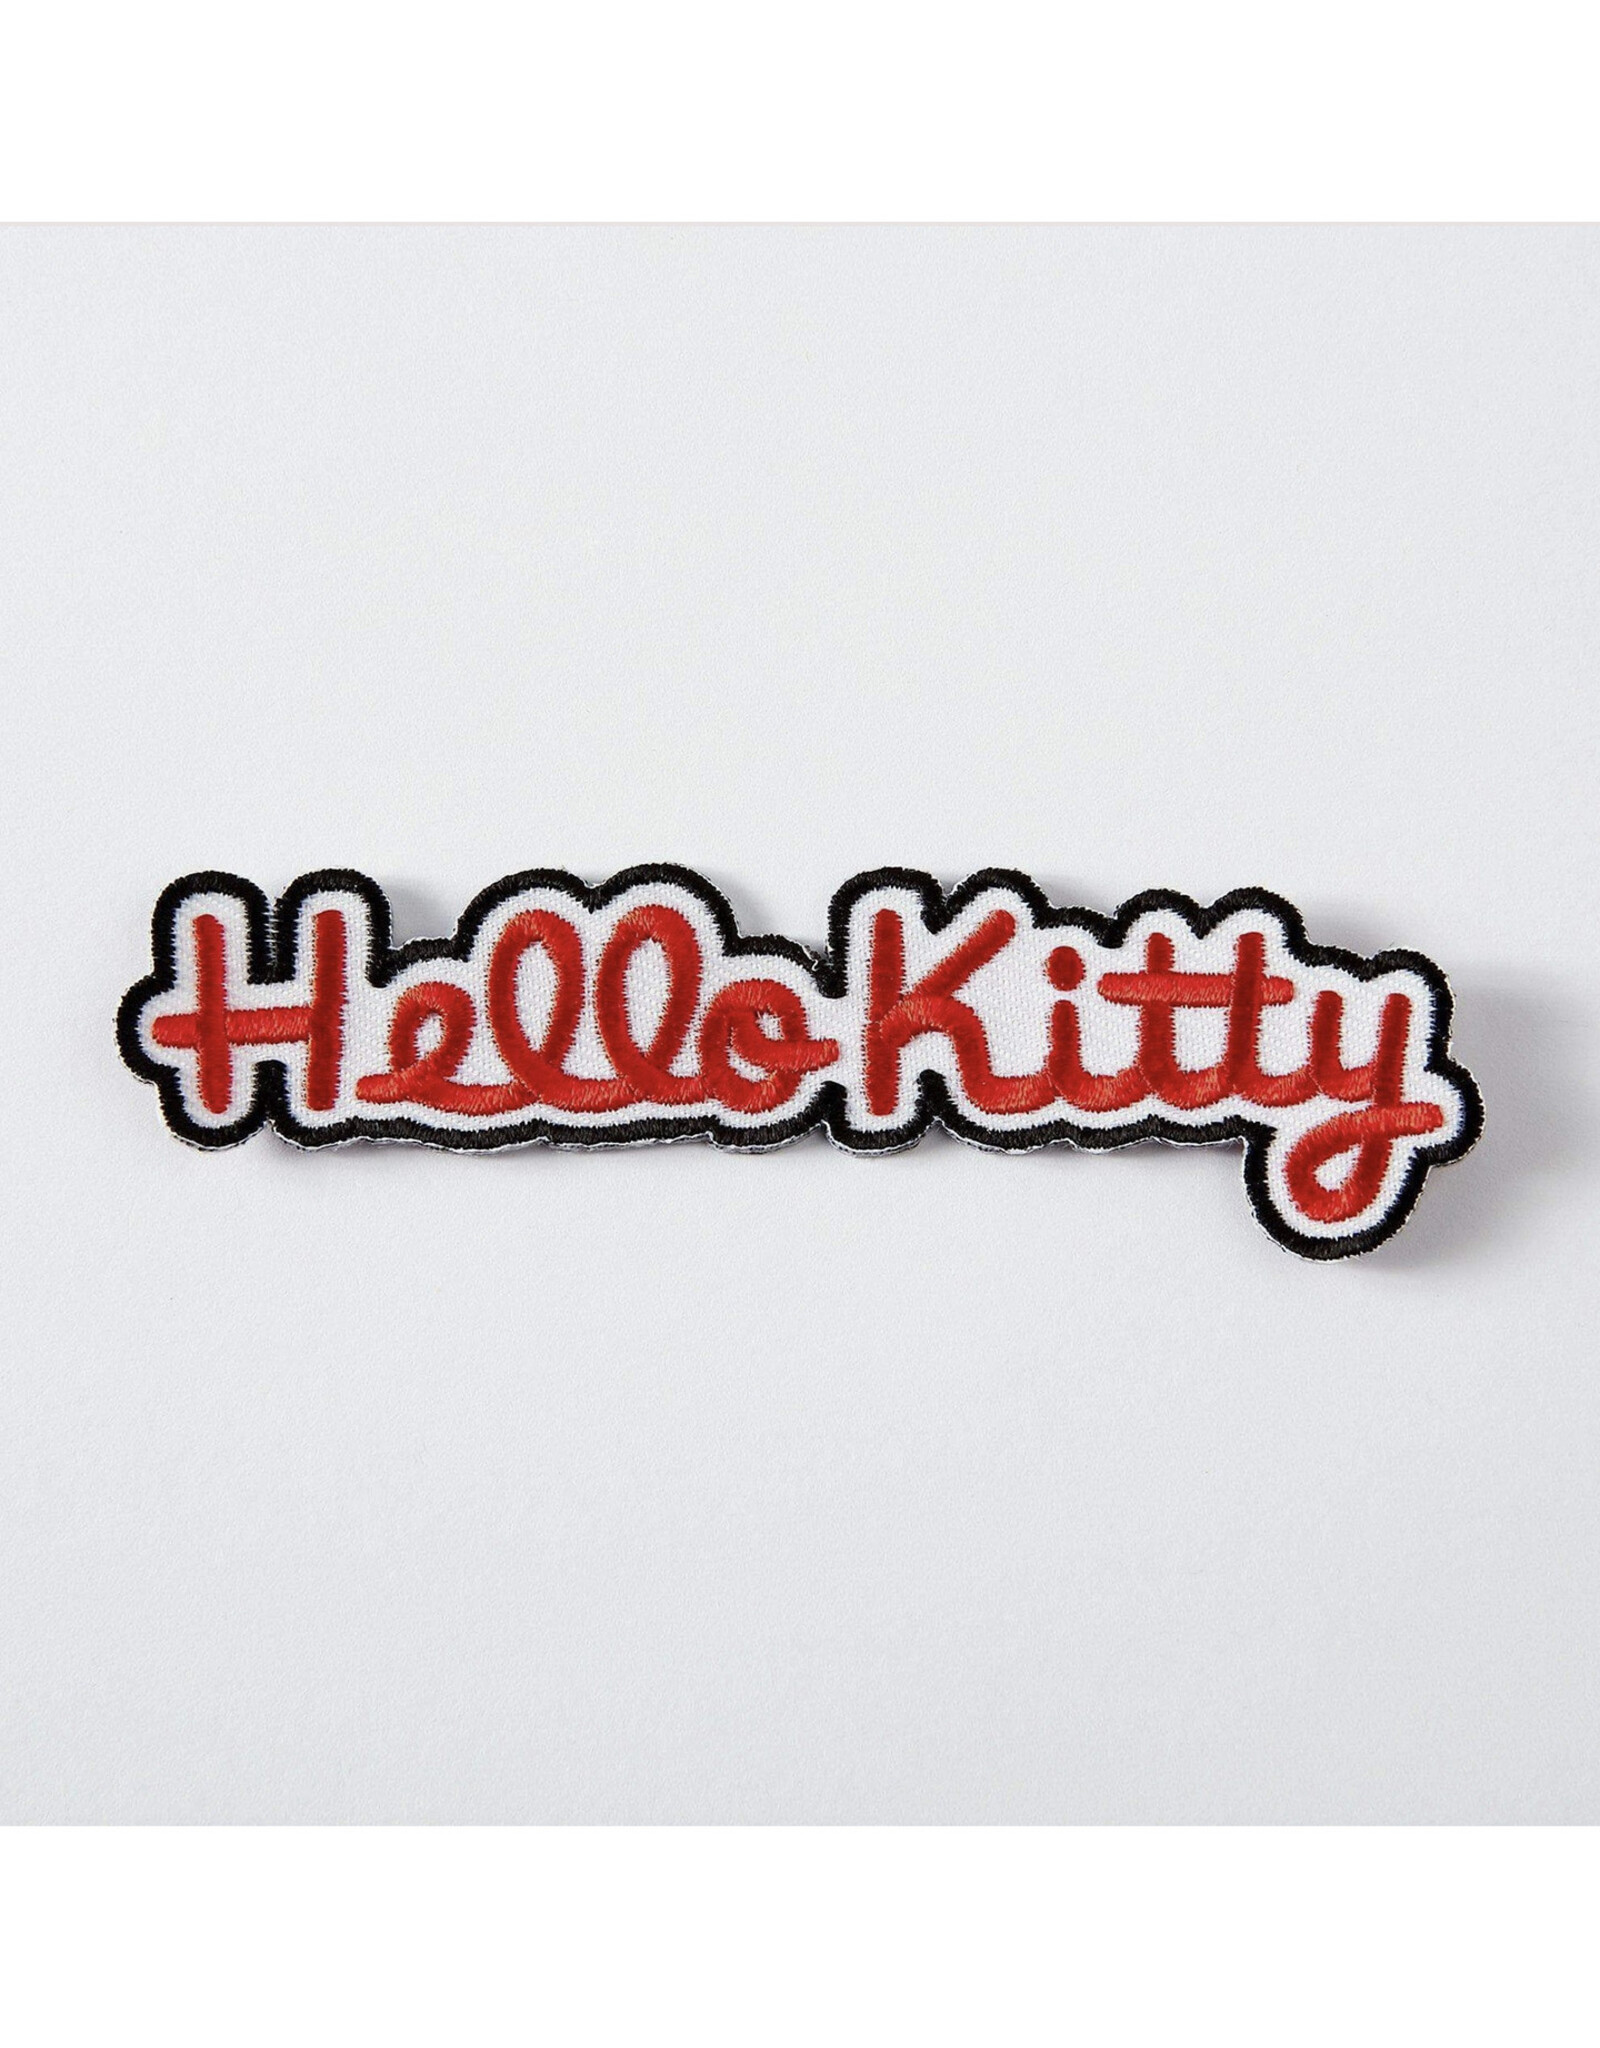 Hello Kitty Name Embroidered Iron-On Patch